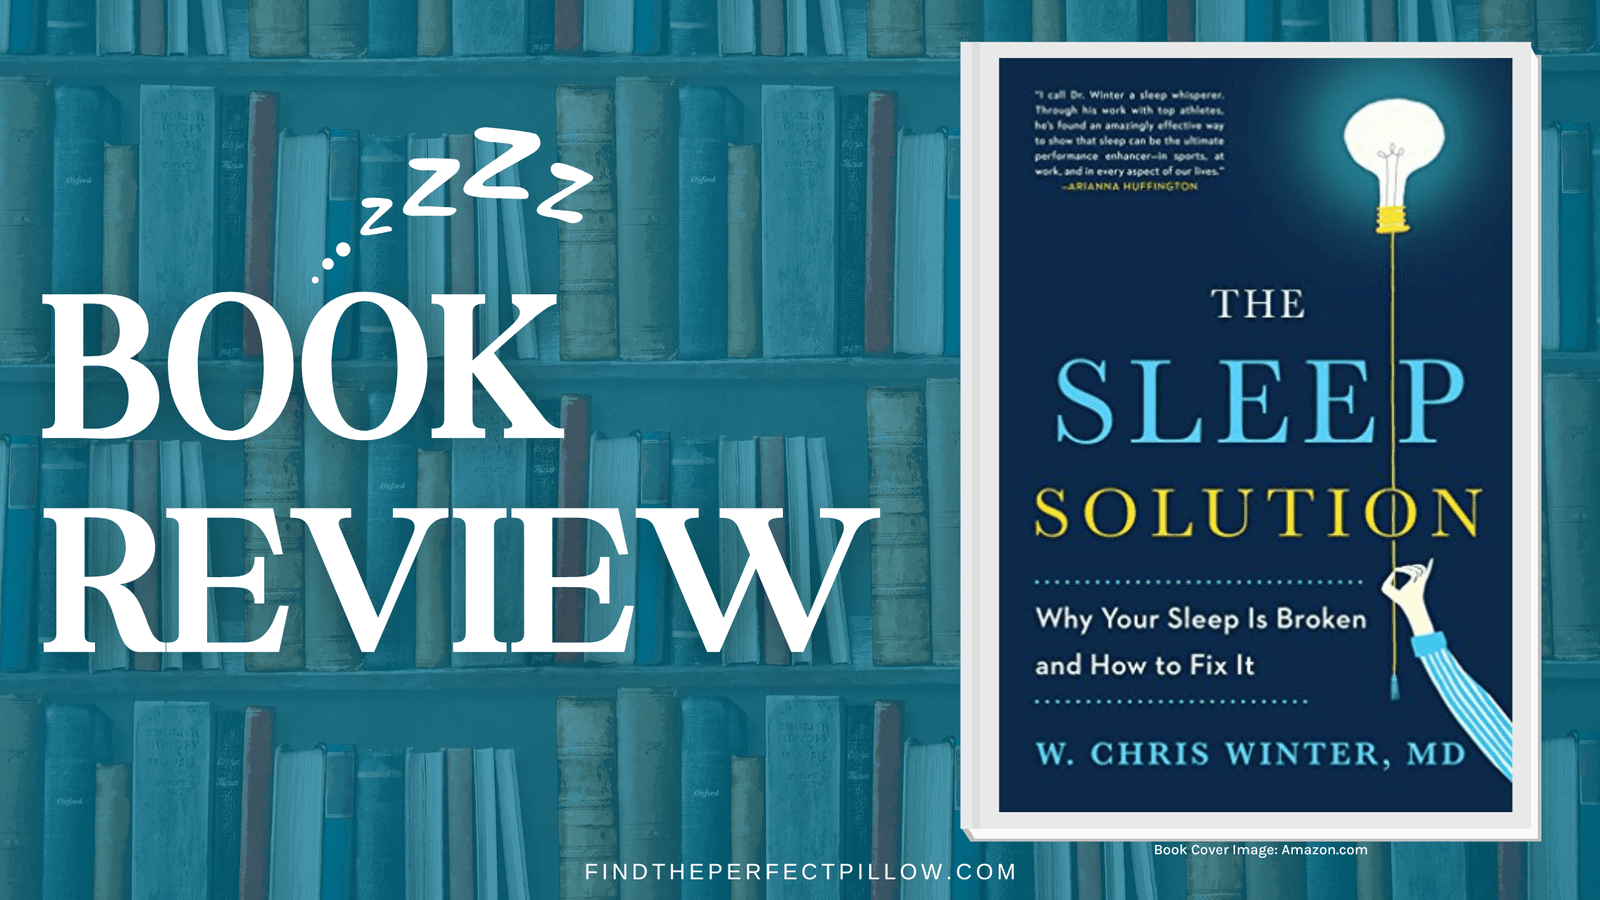 Book Review- The Sleep Solution Why Your Sleep is Broken and How to Fix It- FindthePerfectPilow.com